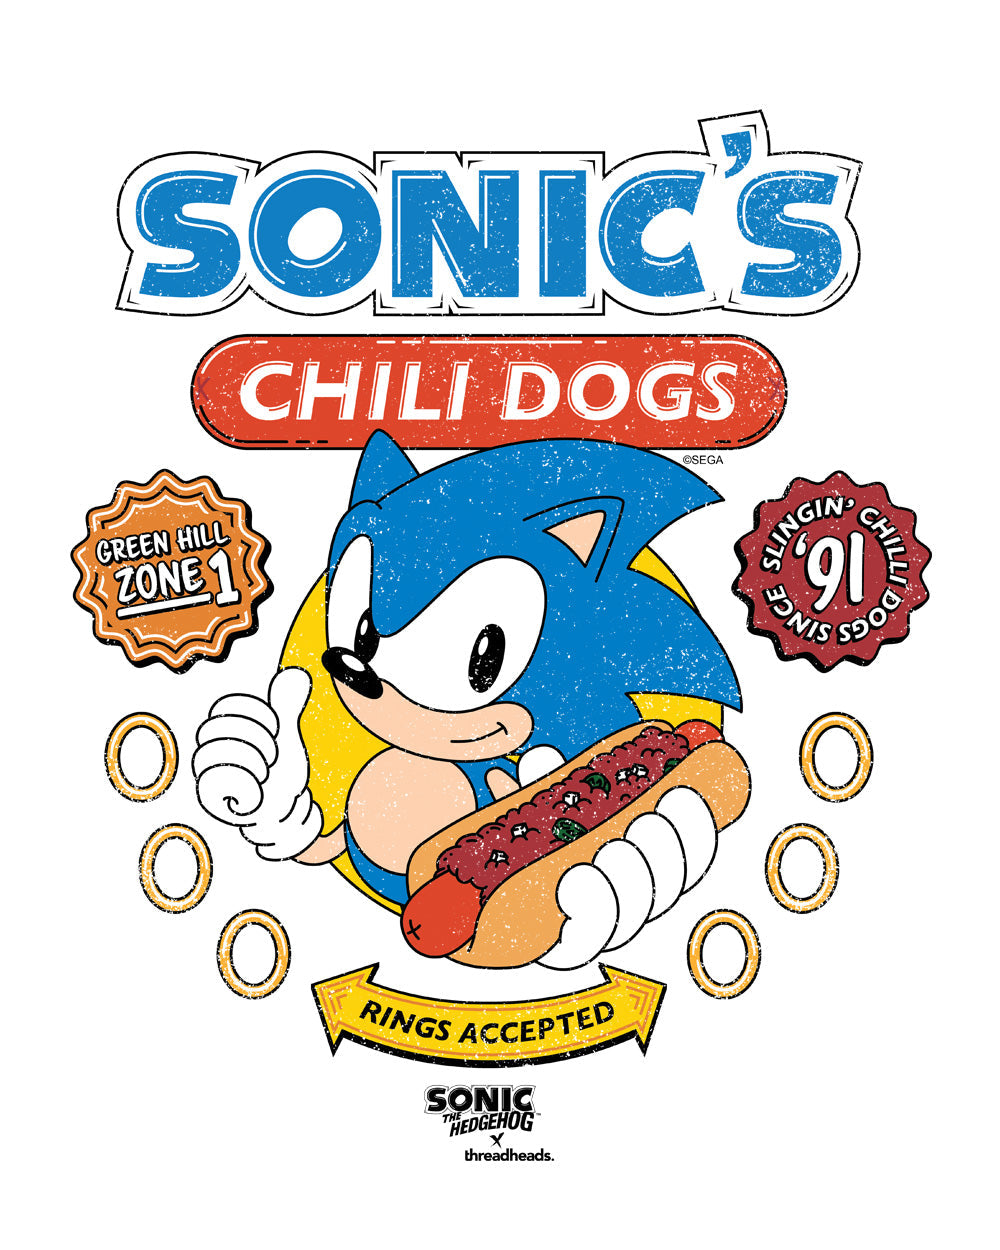 Sonic The Hedgehog Chili Dogs Retro 90s Video Game Cartridge Console Officially Licensed SEGA T-Shirt